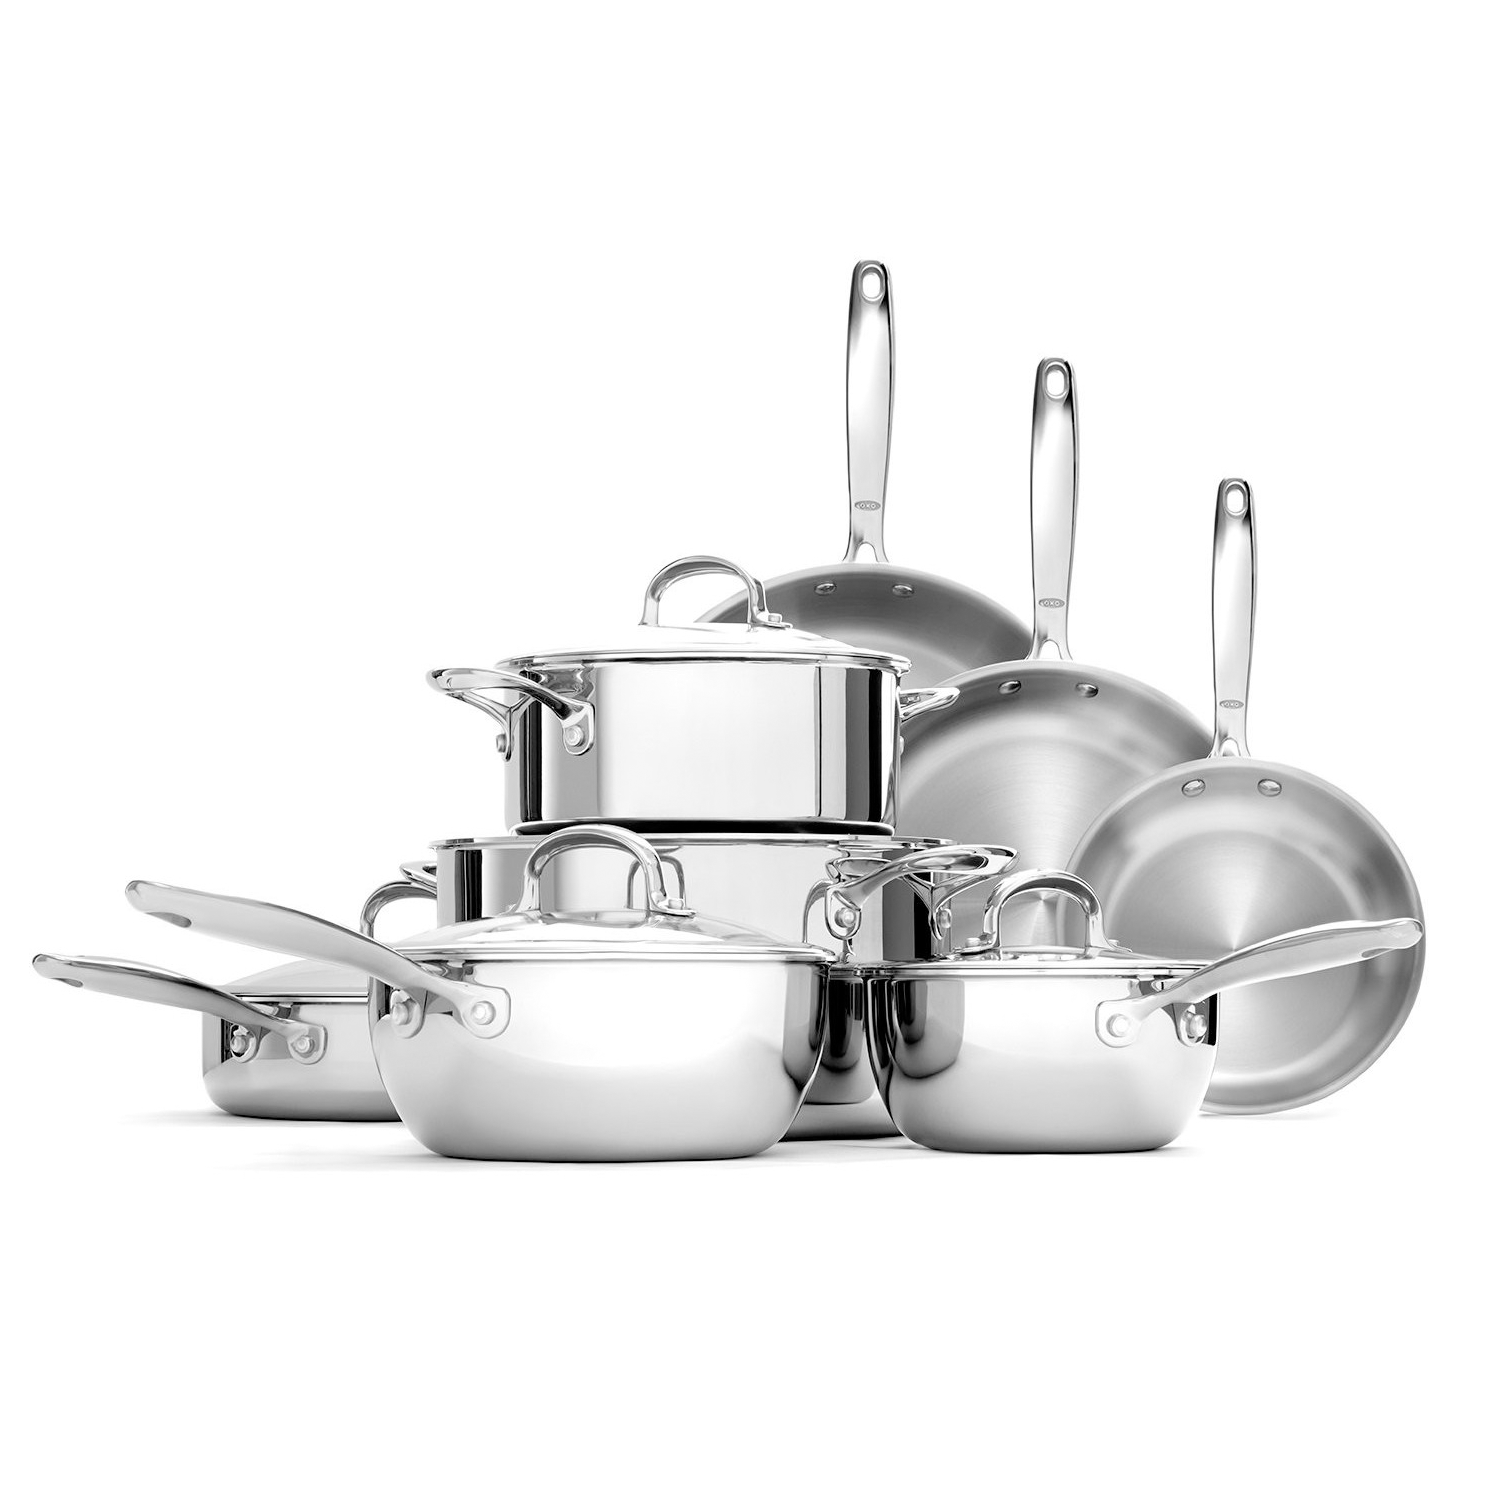 Lagostina Tri-Ply 12 Pc. Stainless Set with Glass Lids